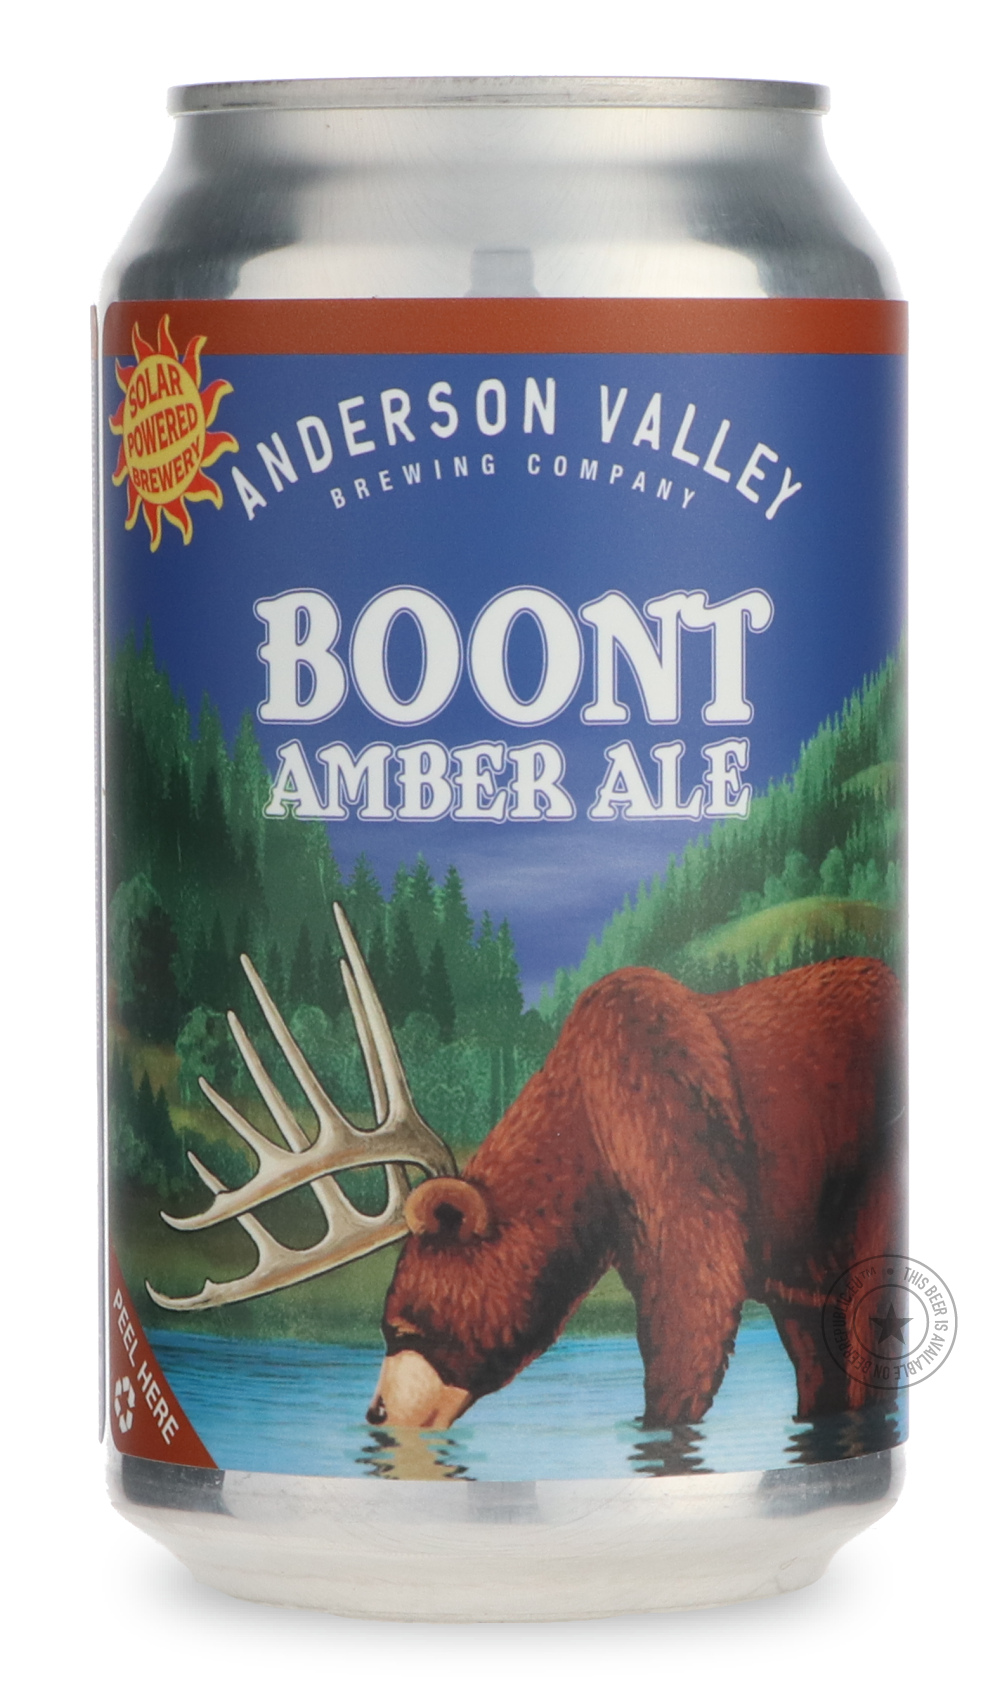 -Anderson Valley- Boont Amber Ale-Brown & Dark- Only @ Beer Republic - The best online beer store for American & Canadian craft beer - Buy beer online from the USA and Canada - Bier online kopen - Amerikaans bier kopen - Craft beer store - Craft beer kopen - Amerikanisch bier kaufen - Bier online kaufen - Acheter biere online - IPA - Stout - Porter - New England IPA - Hazy IPA - Imperial Stout - Barrel Aged - Barrel Aged Imperial Stout - Brown - Dark beer - Blond - Blonde - Pilsner - Lager - Wheat - Weizen 